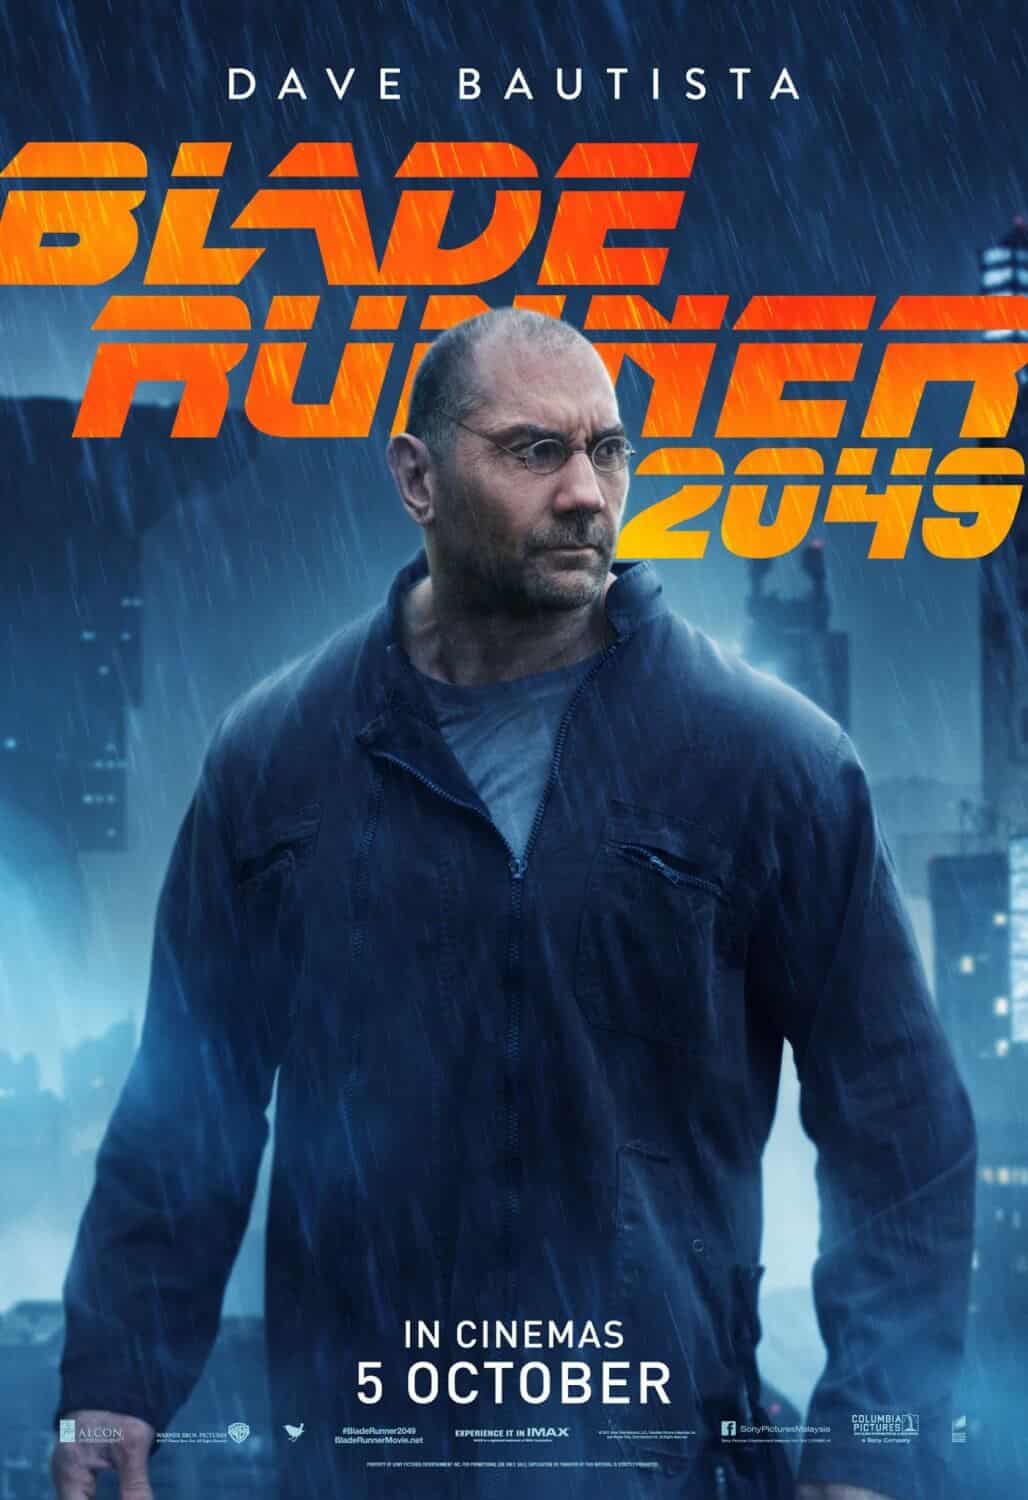 dave bautista blade runner 2049 character poster